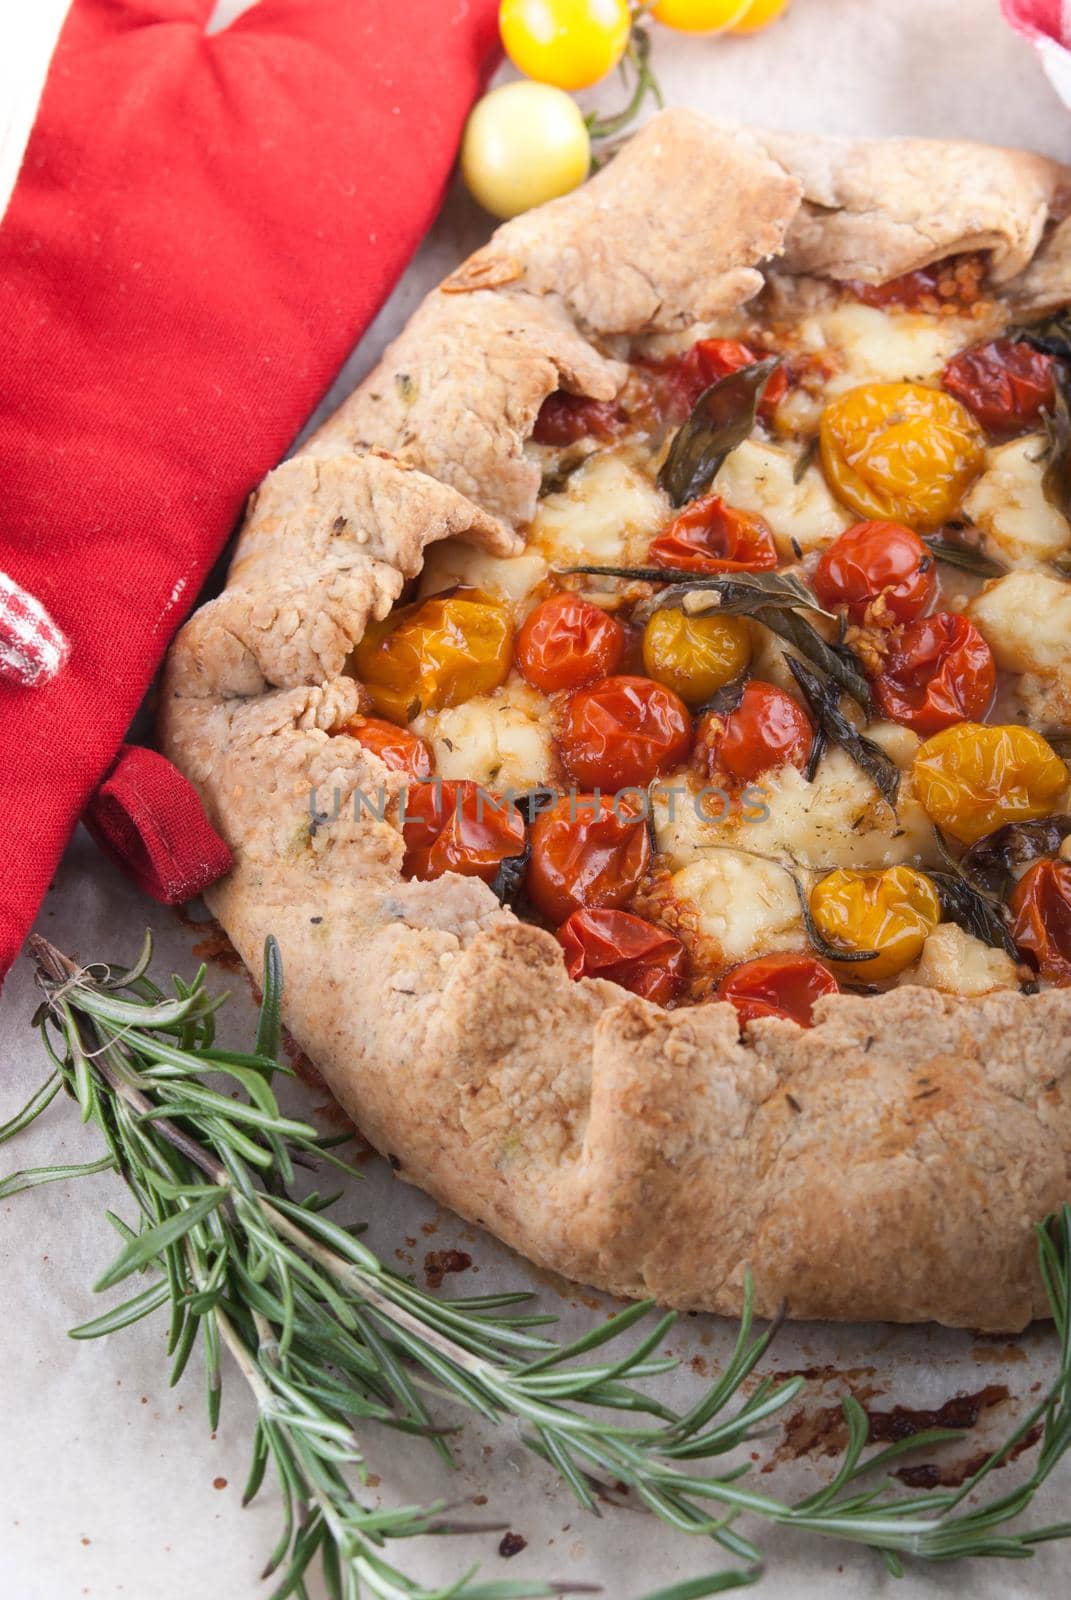 delicious homemade galetta pie with cherry tomatoes, feta cheese and basil and rosmarim herbs